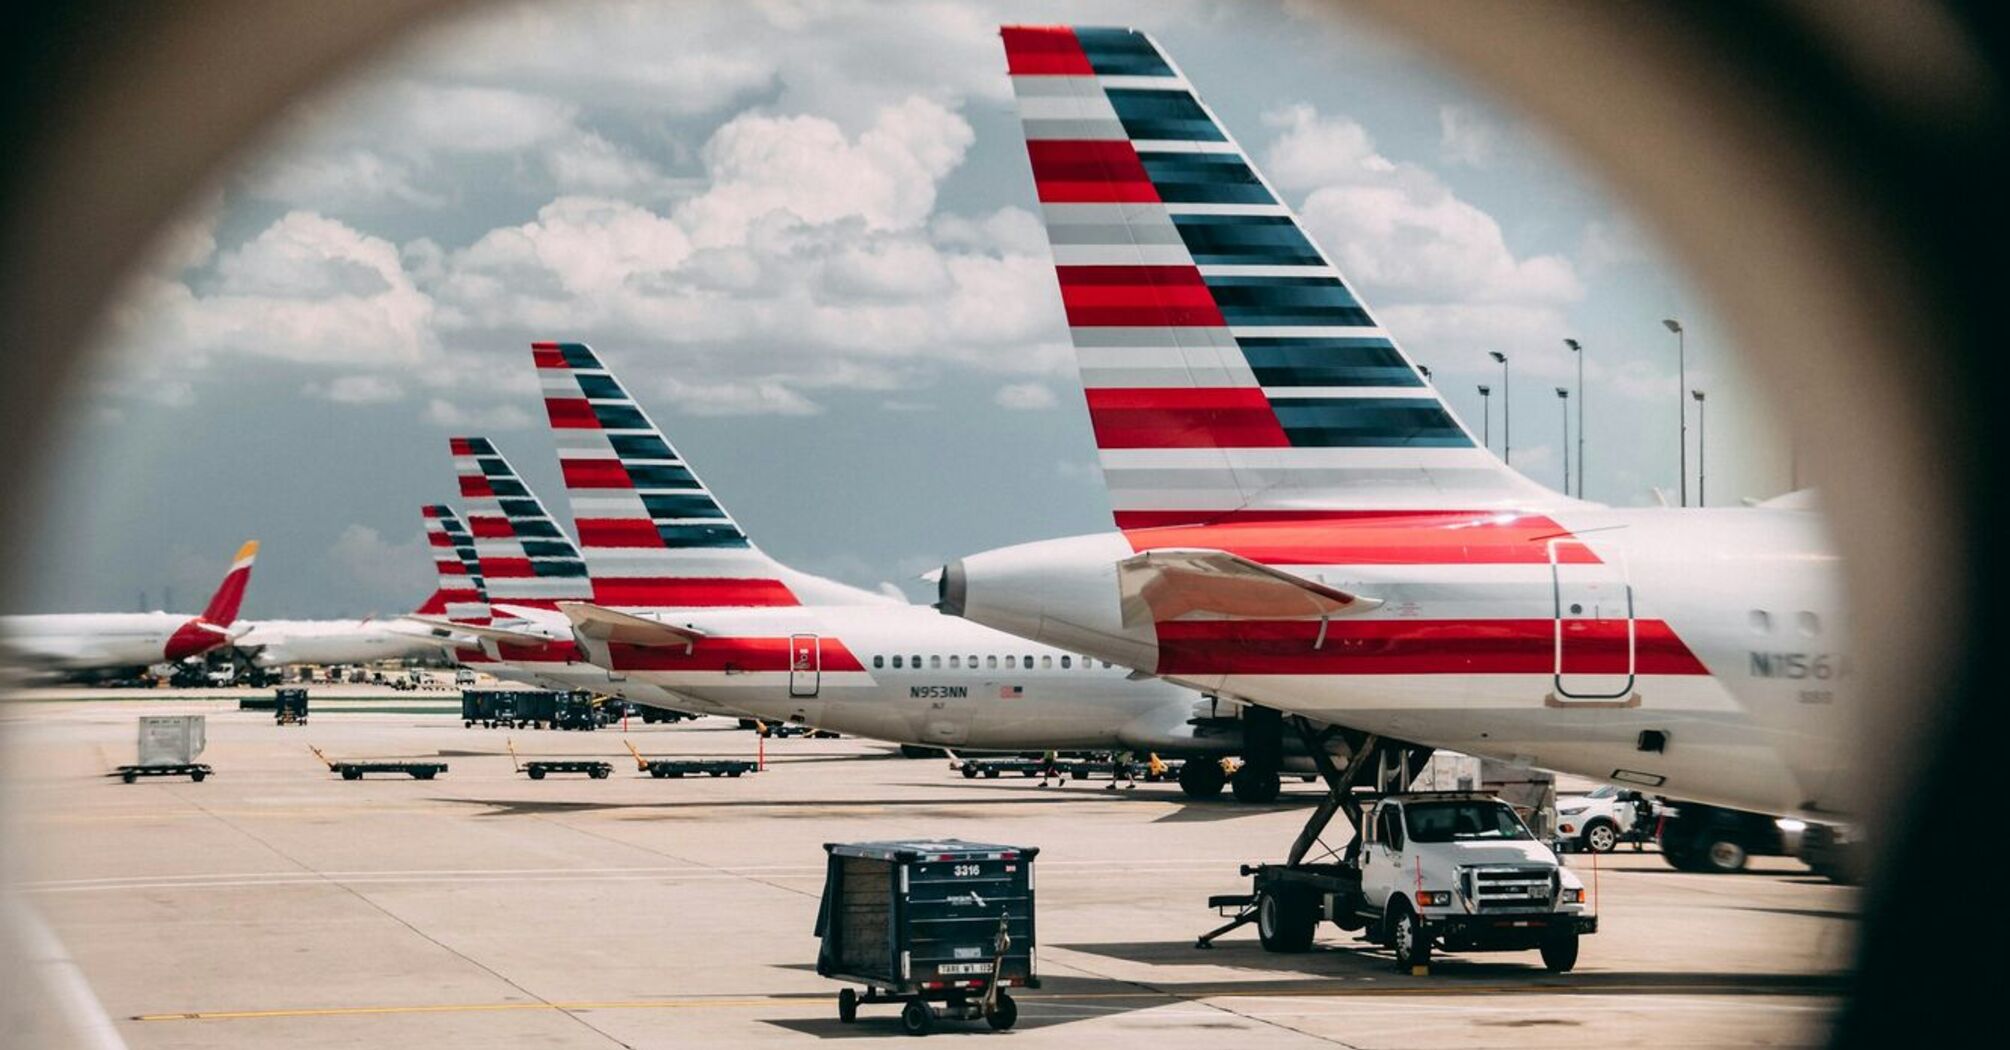 American Airlines planes parked at the airport